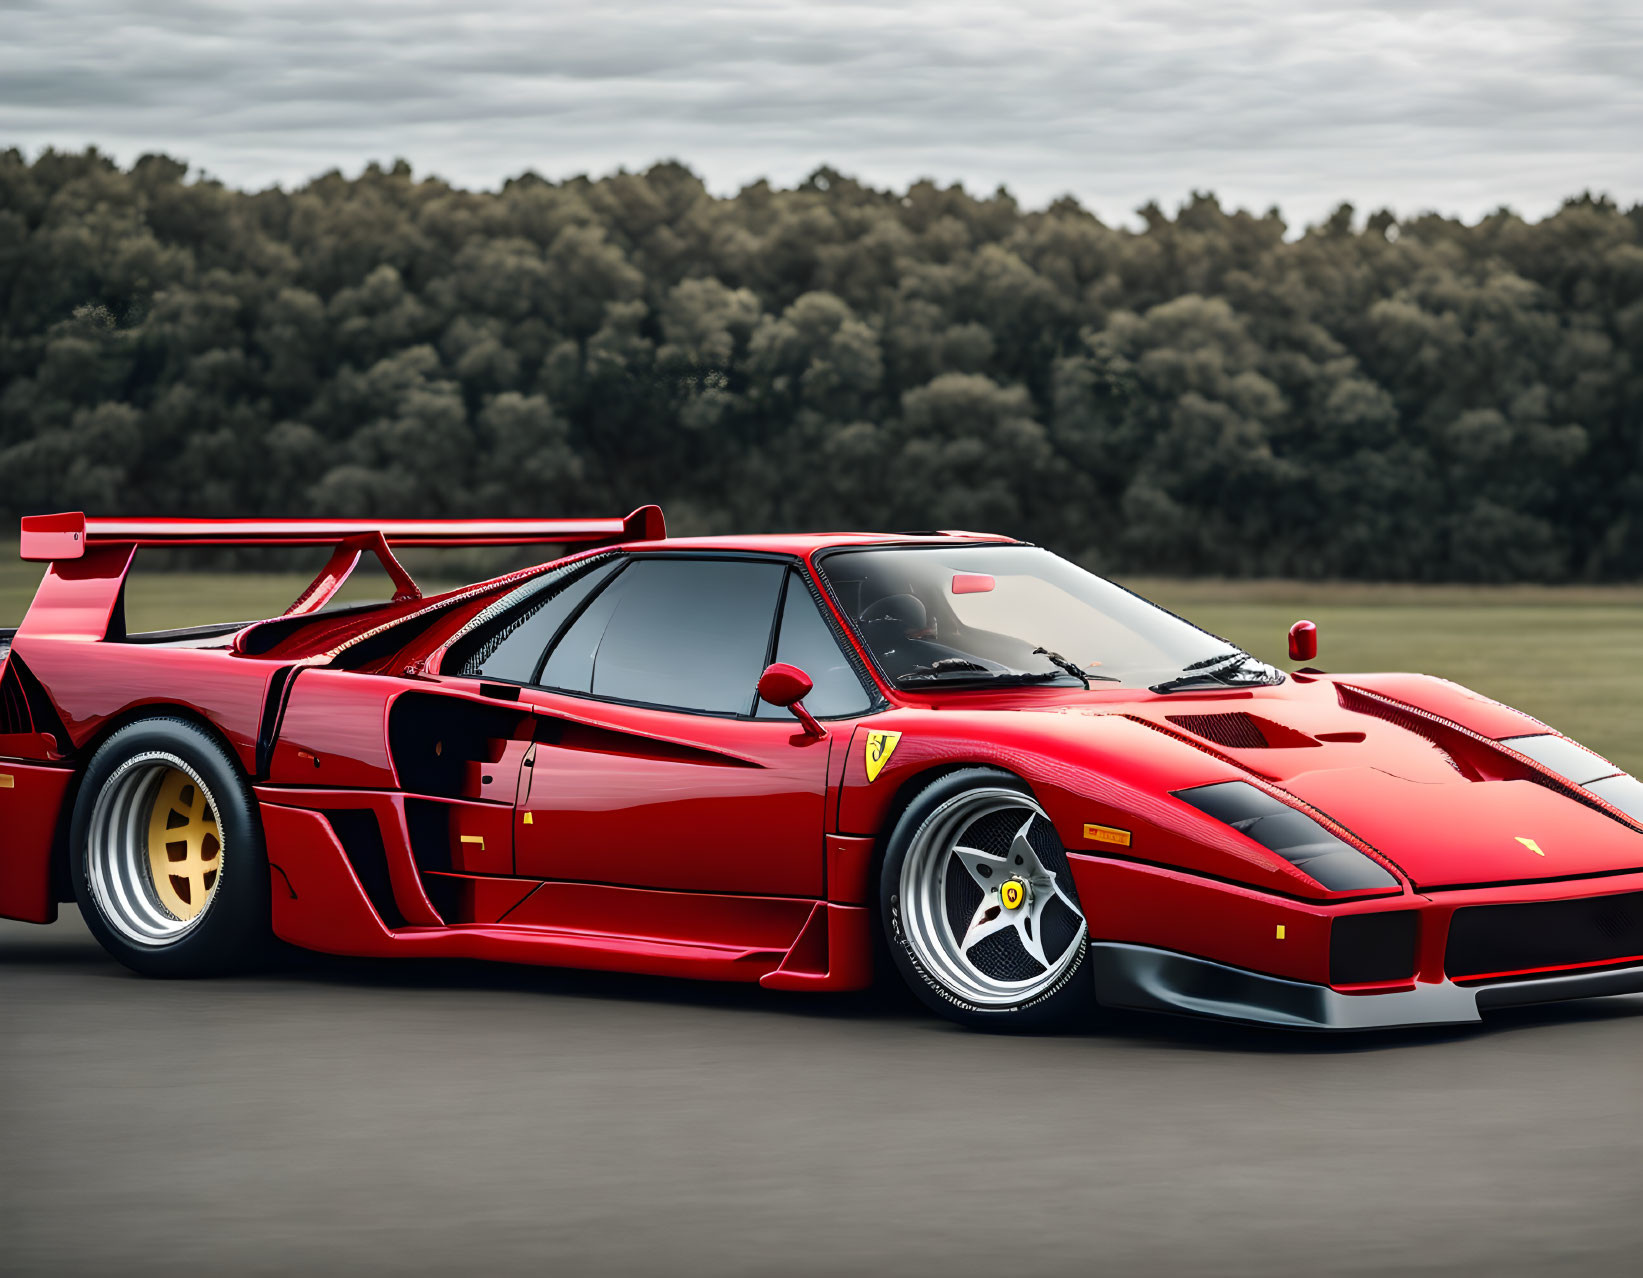 Red Ferrari F40 with Large Rear Wing on Track Displaying Sleek Design